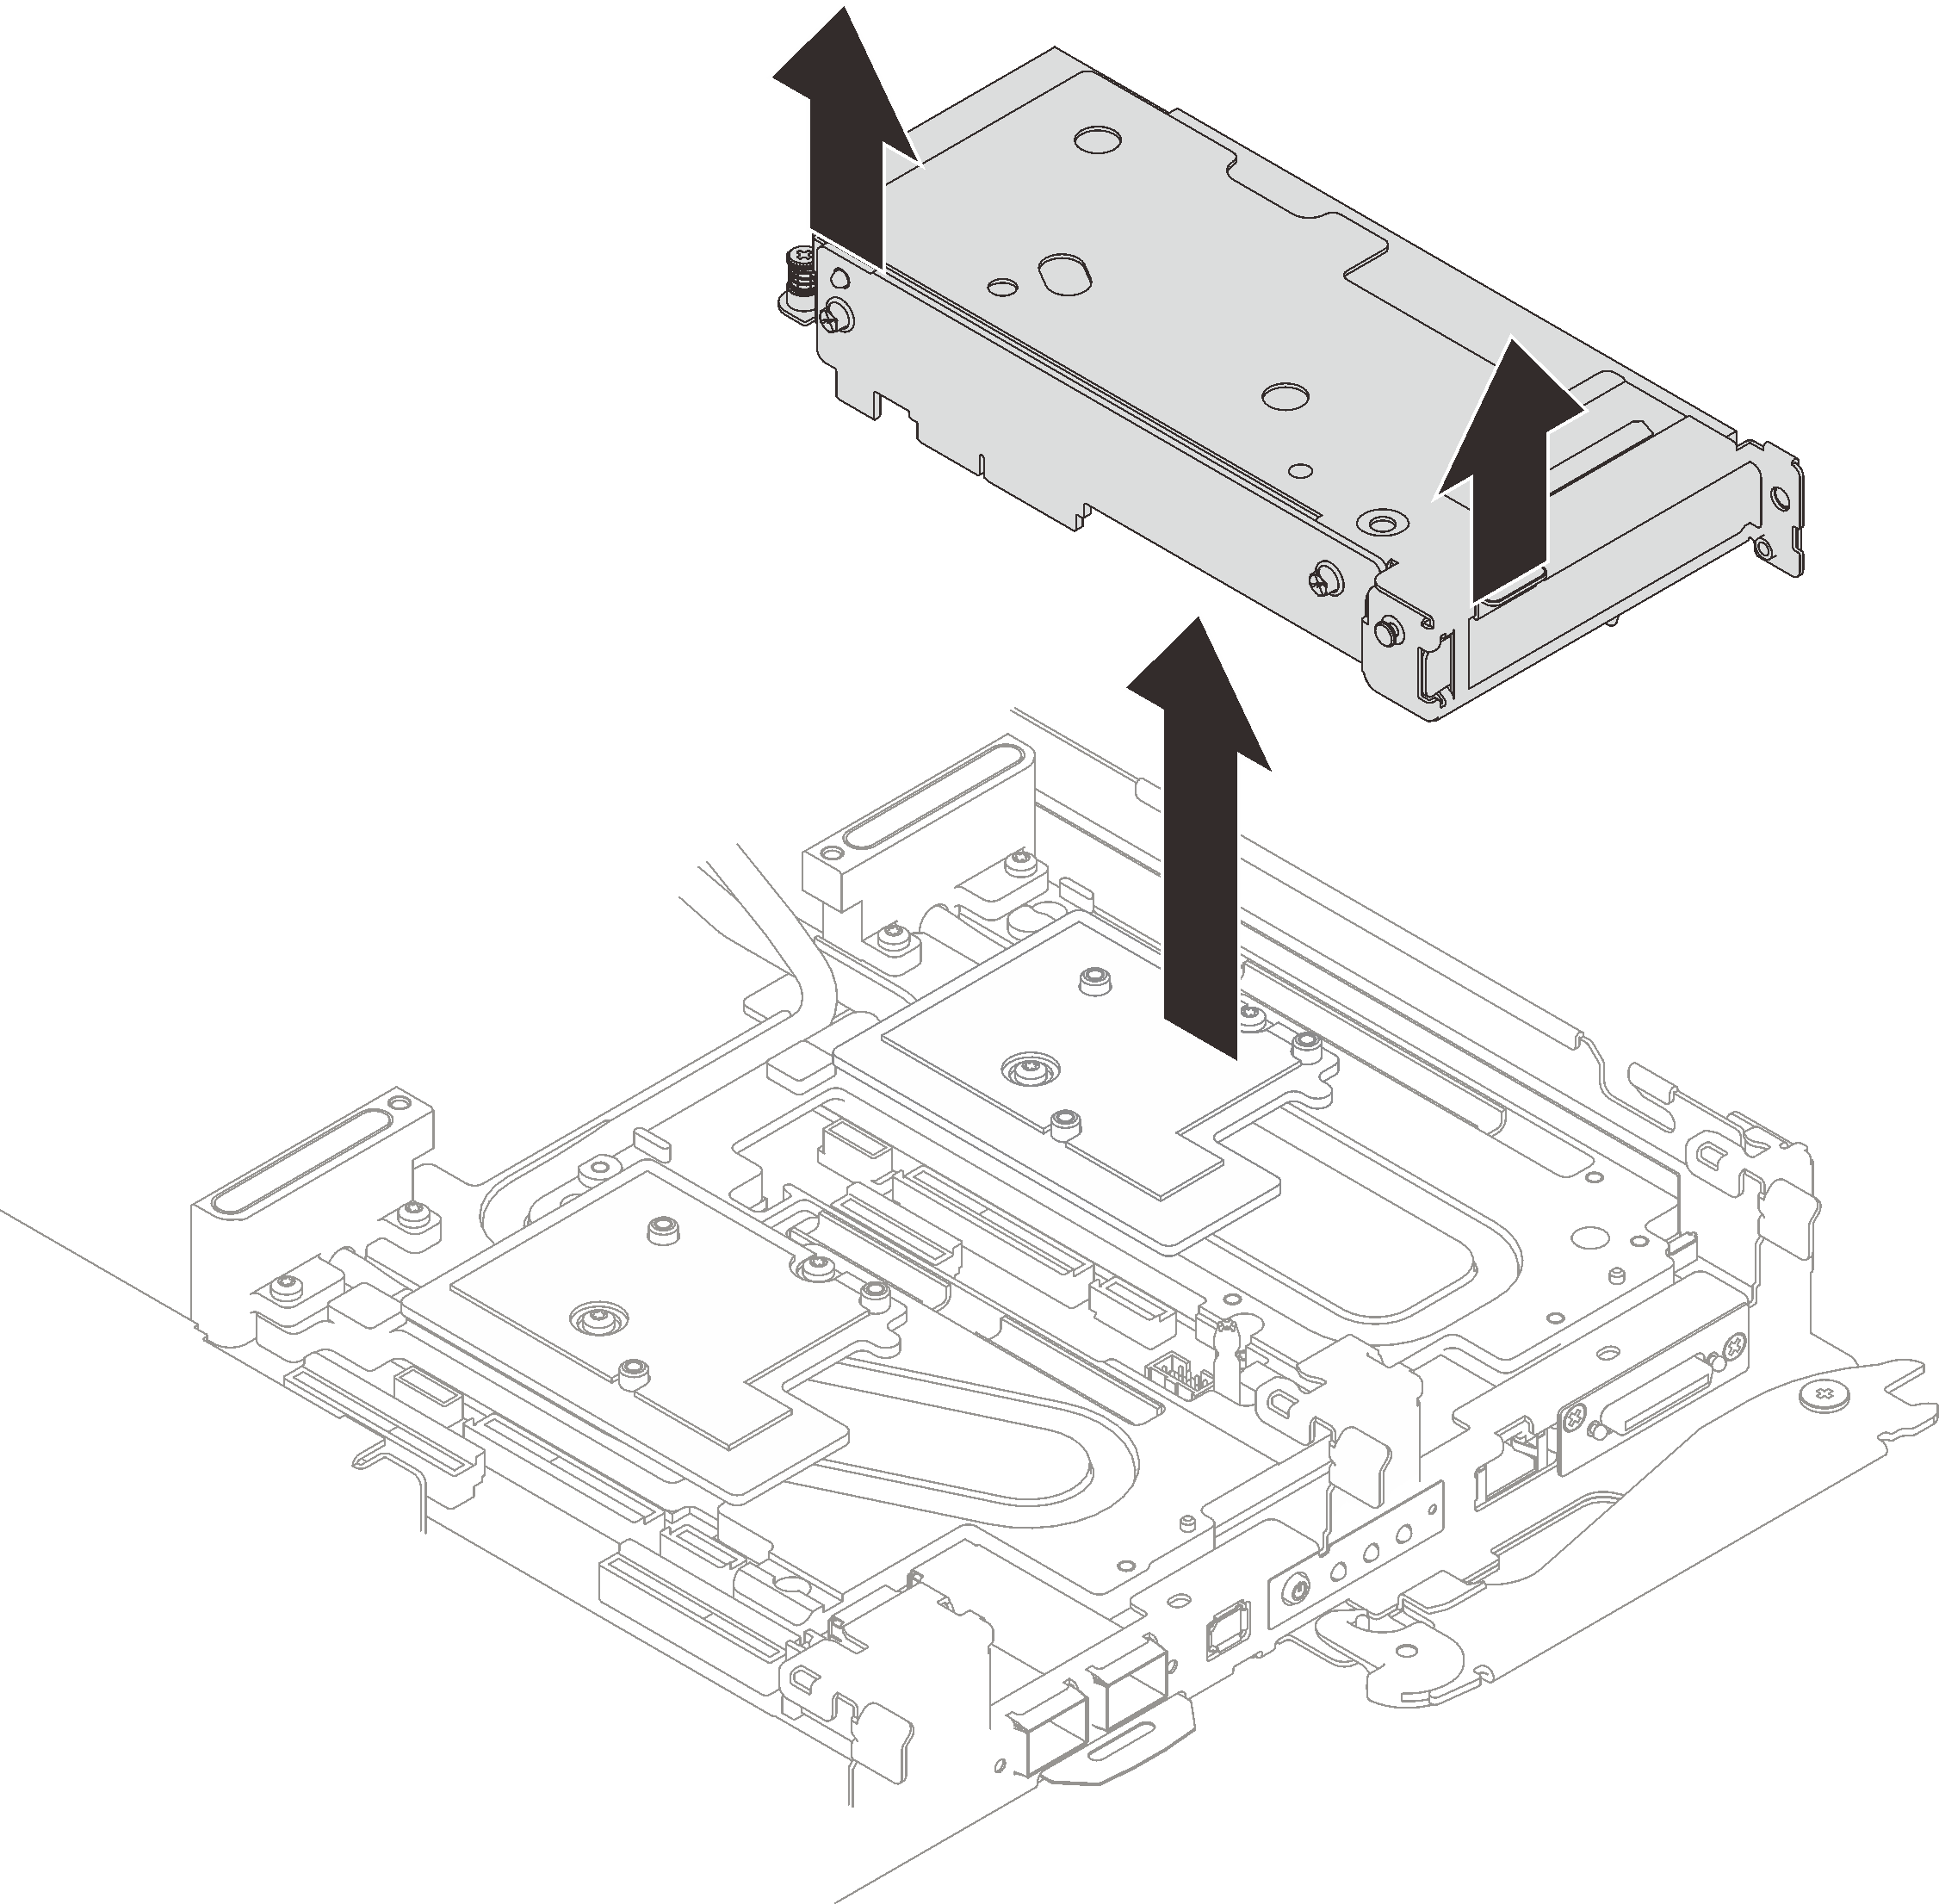 Removing the PCIe riser cage assembly